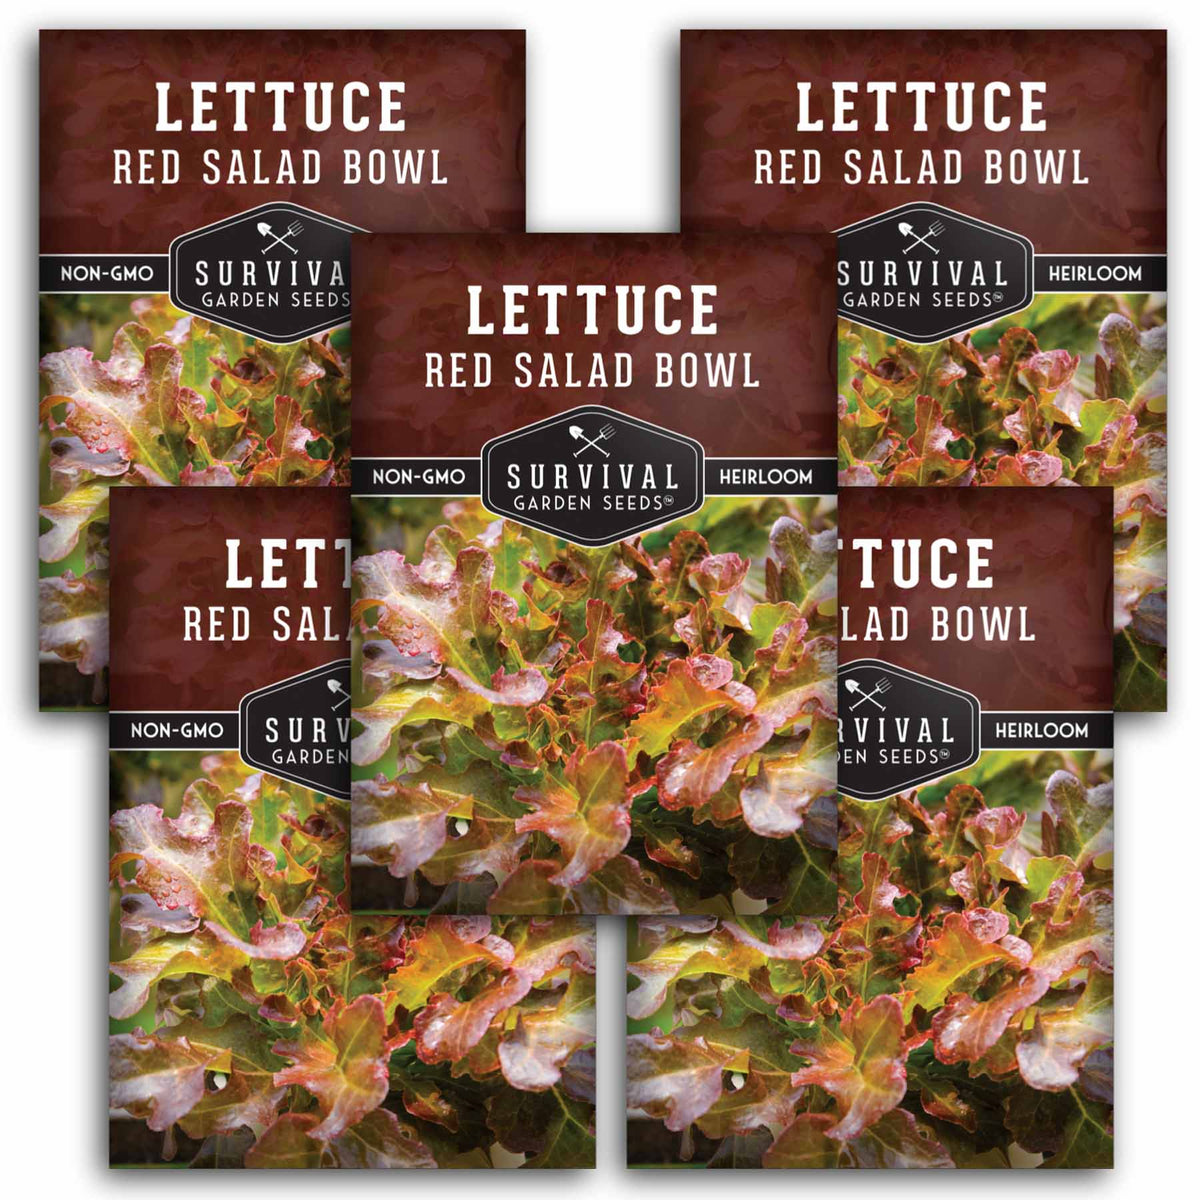 5 packets of Red Salad Bowl lettuce seeds